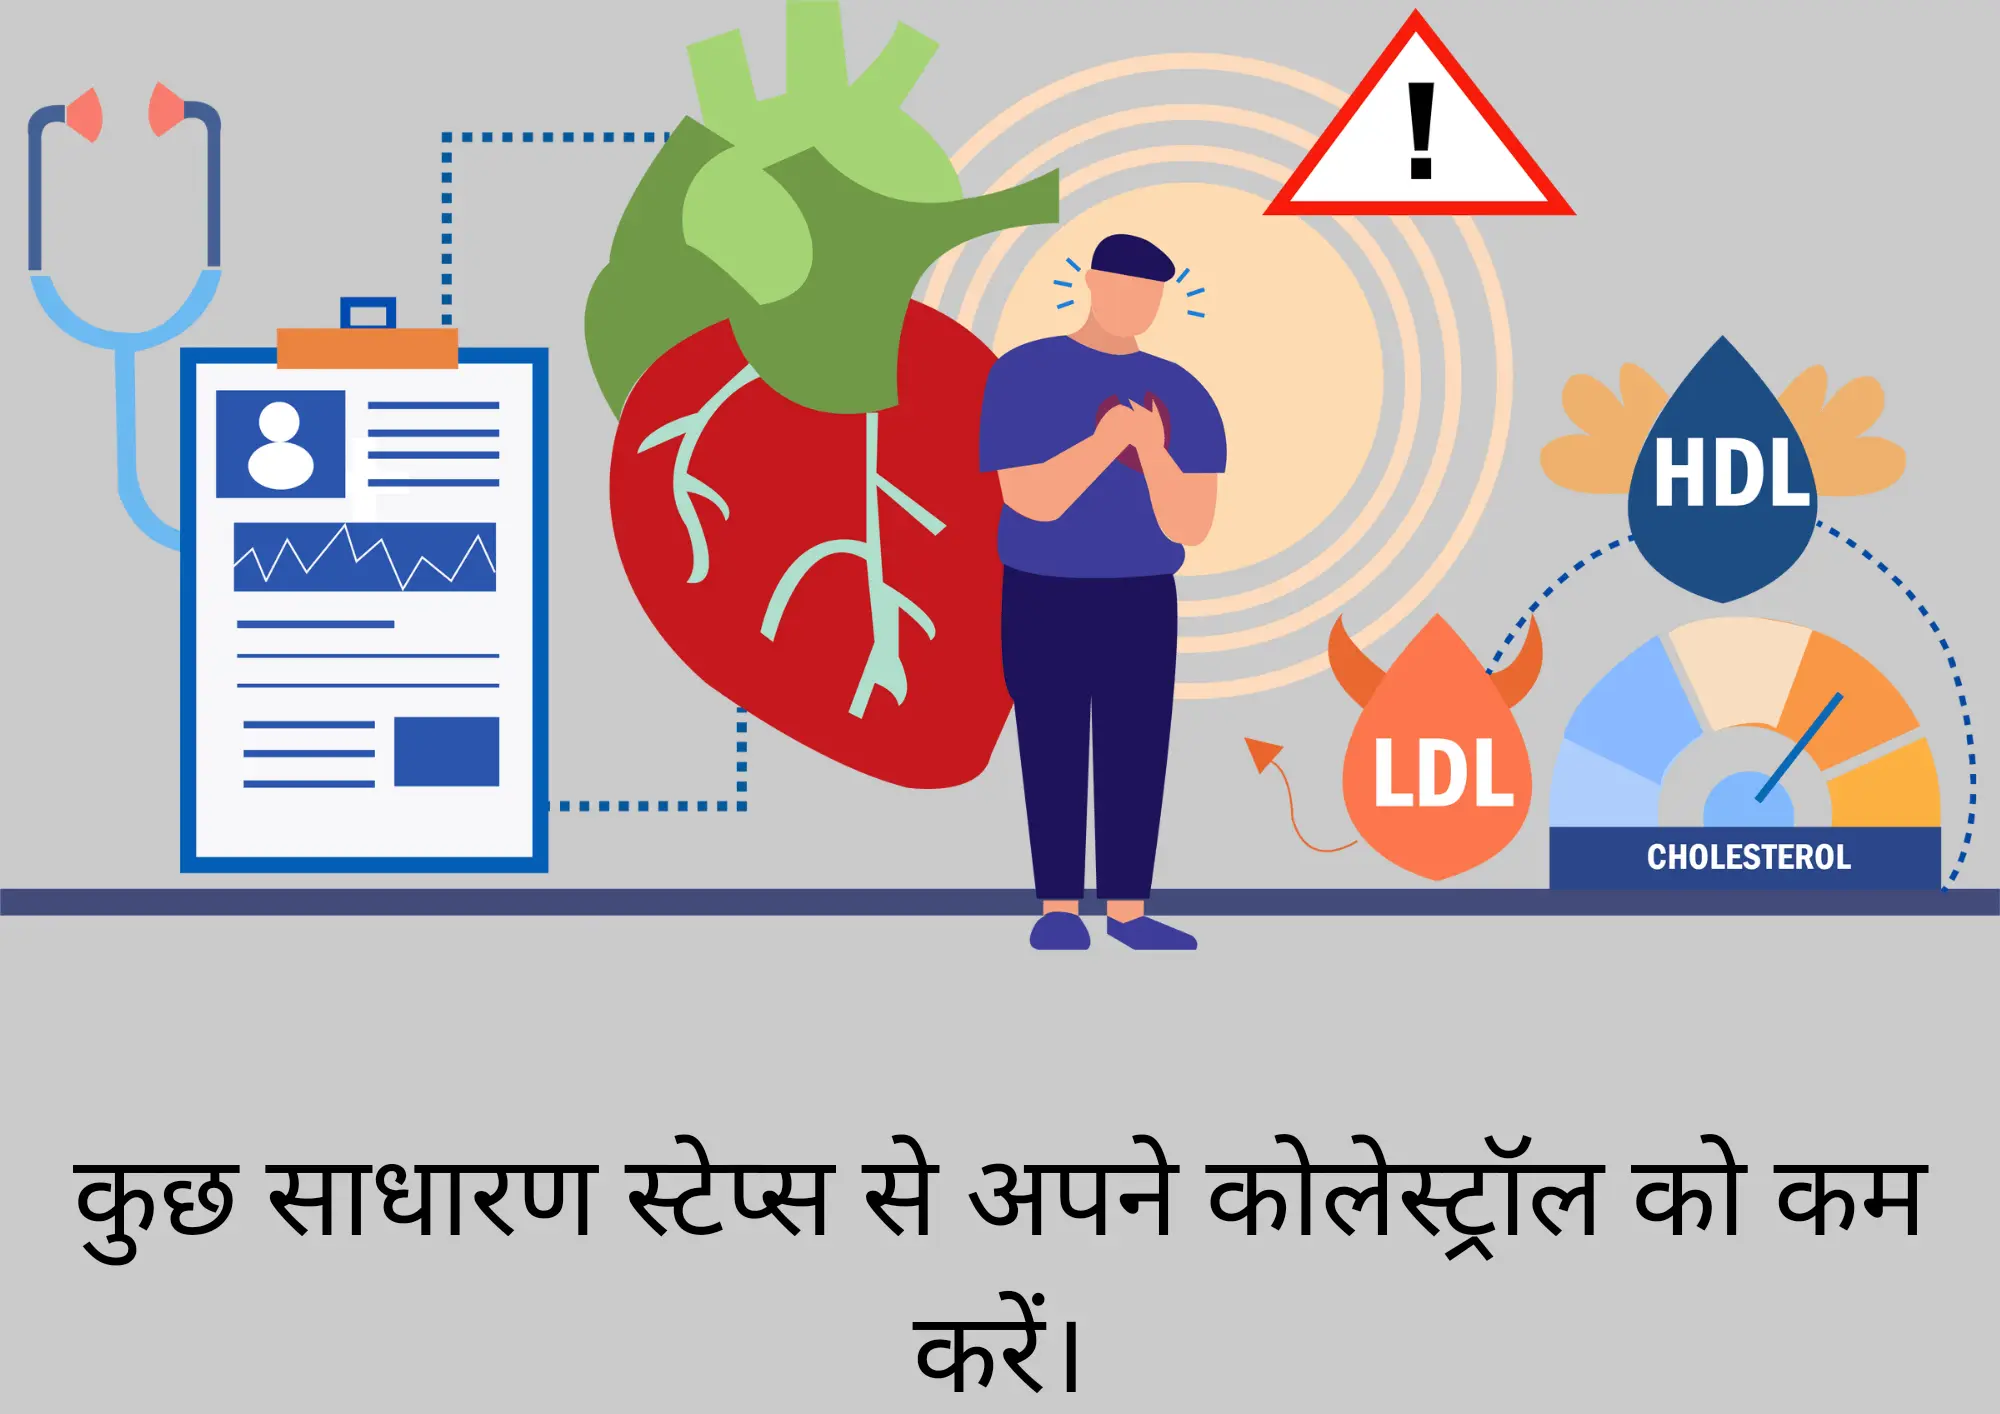 How to reduce cholesterol in hindi